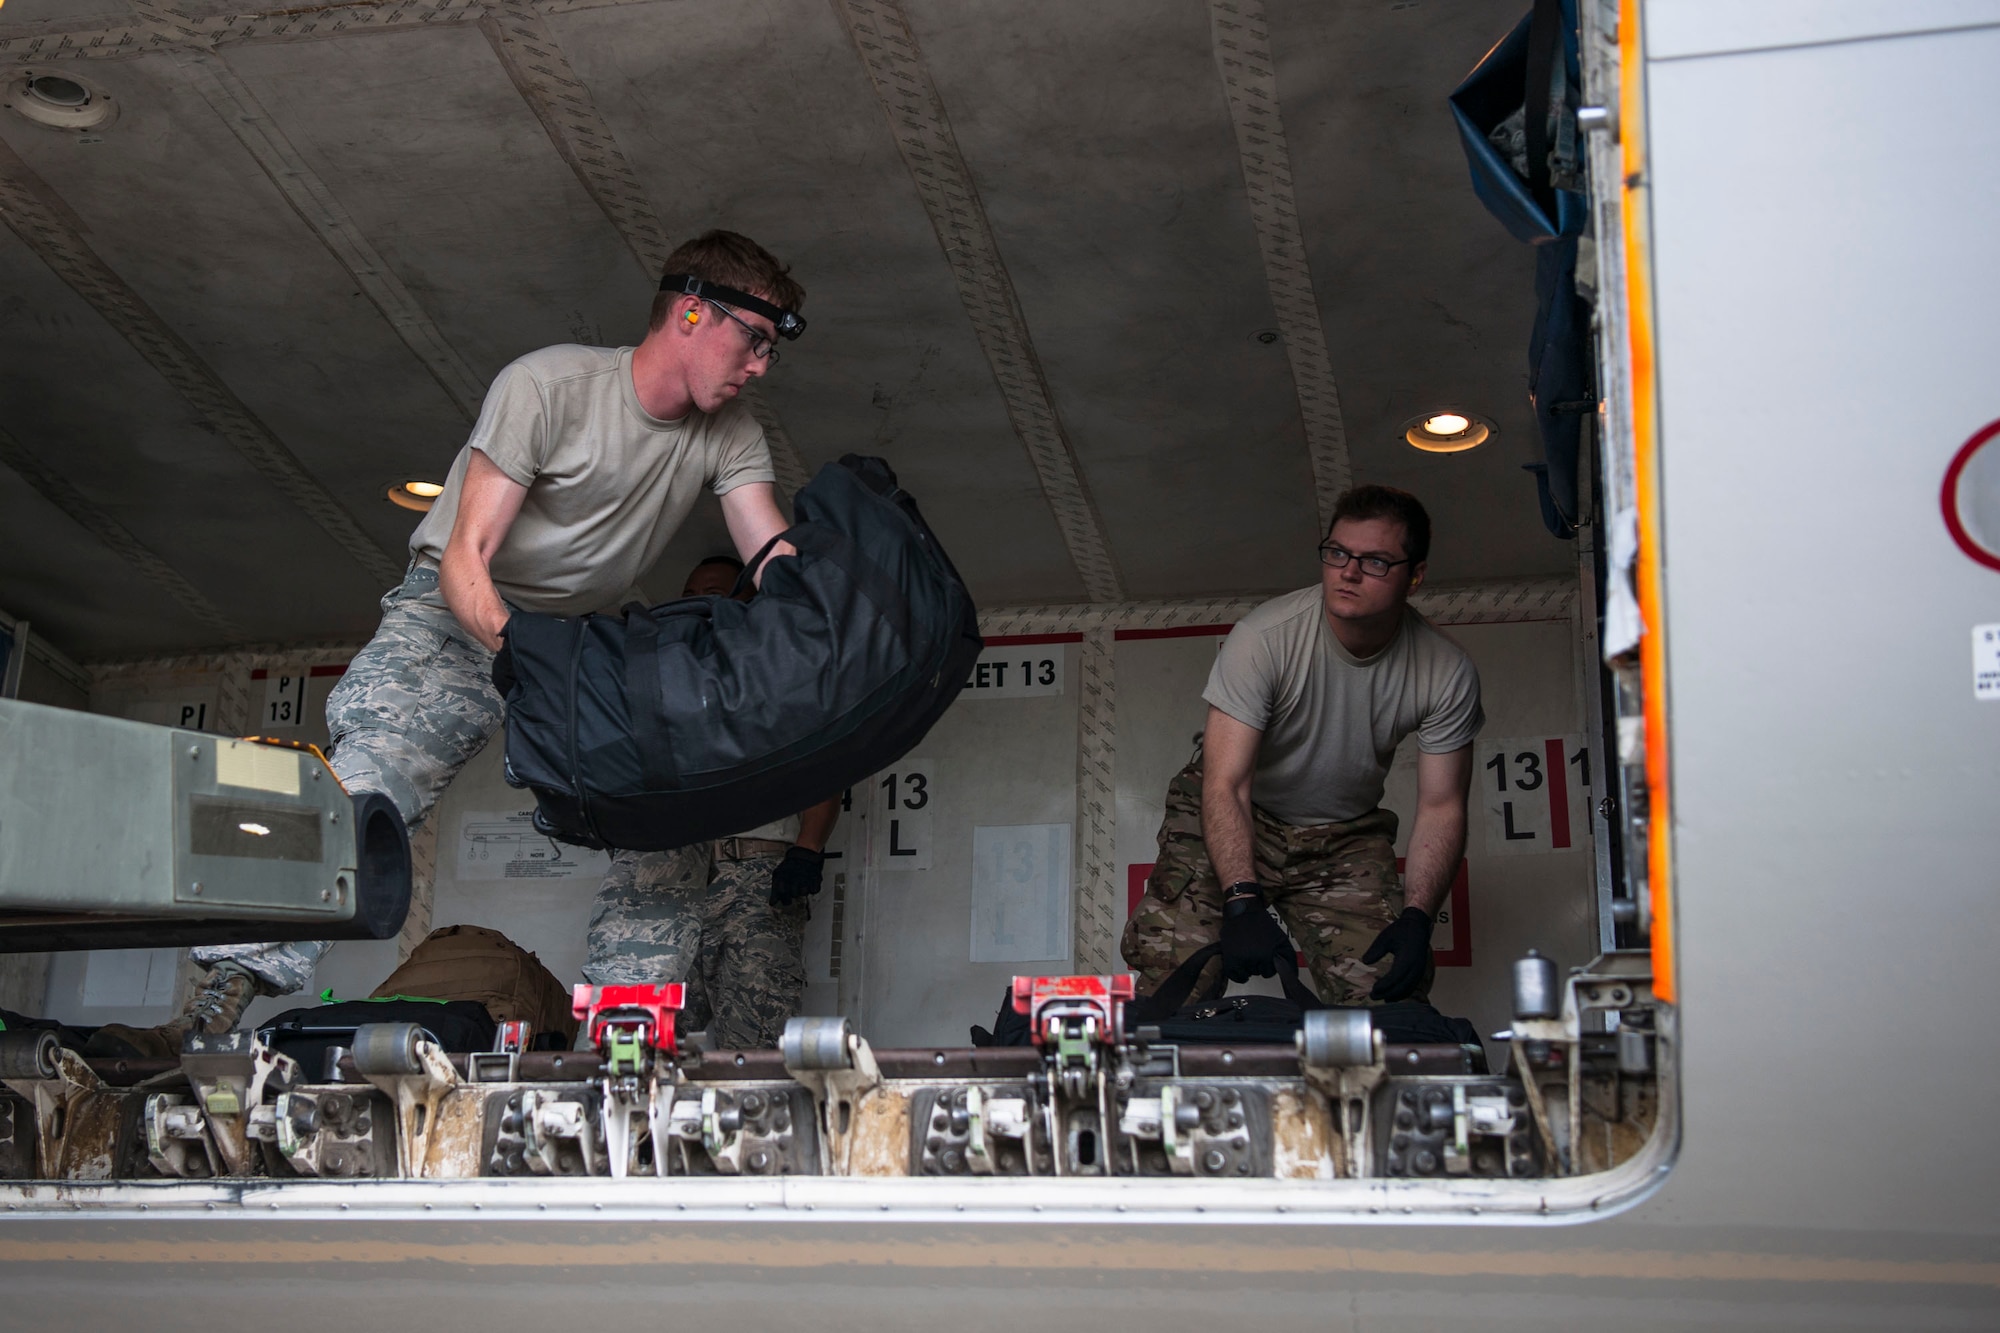 Airmen from the 23d Logistics Readiness Squadron load a Boeing 767-300ER, Oct. 24, 2018, at Moody Air Force Base, Ga. The 822d, 823d and 824th Base Defense Squadrons (BDS) provide high-risk force protection and integrated base defense for expeditionary air forces. Airmen from the 823d BDS just returned home from conducting relief-in-place in the United States Africa Command theater while Airmen from the 824th BDS took their place. (U.S. Air Force photo by Airman Taryn Butler)